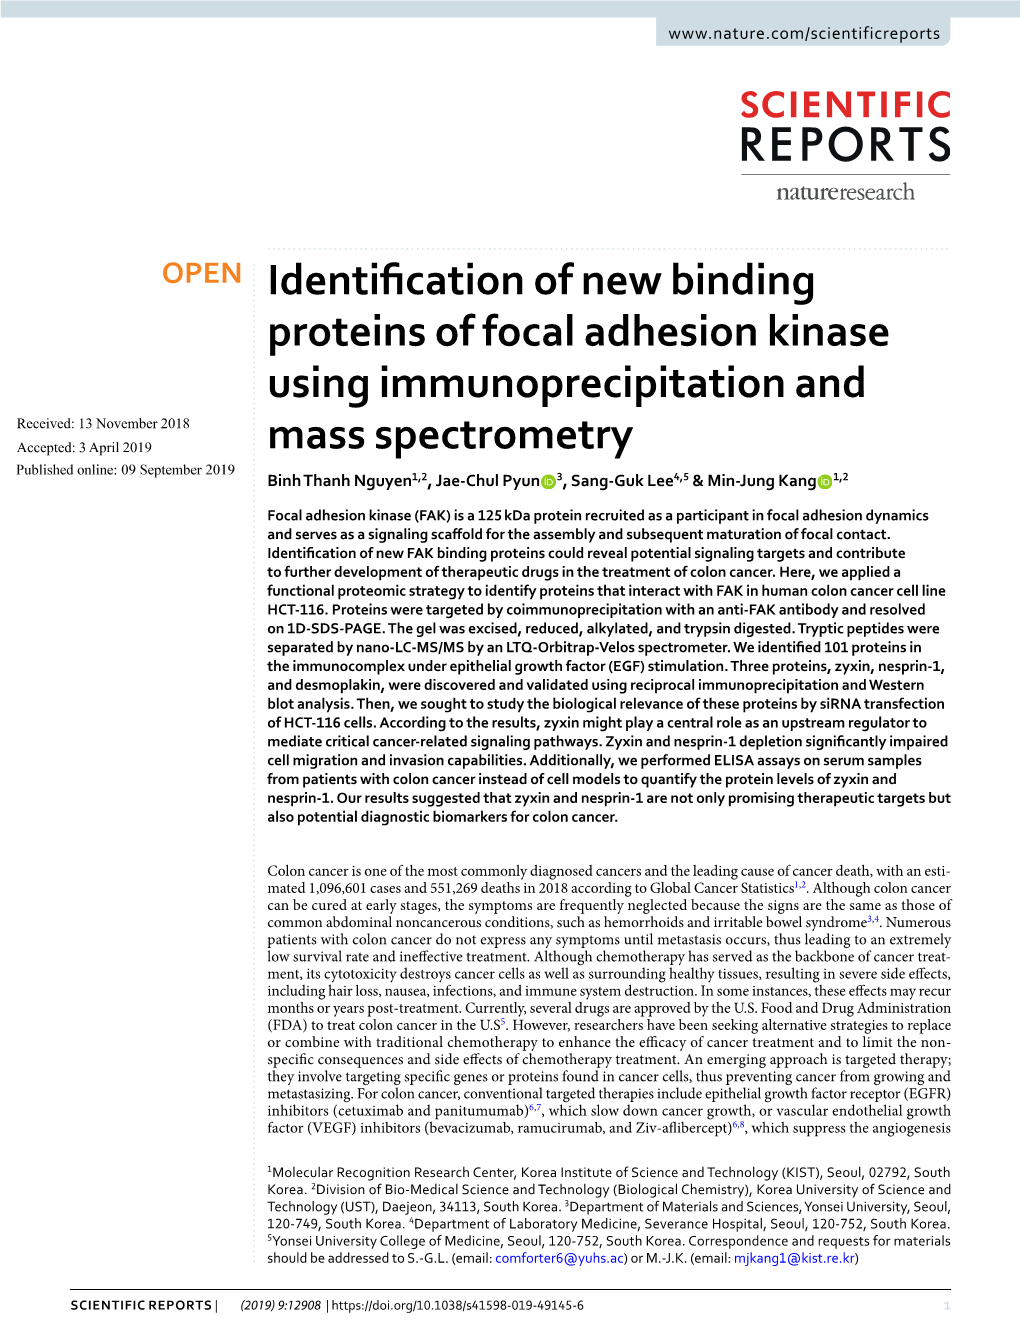 Identification of New Binding Proteins of Focal Adhesion Kinase Using